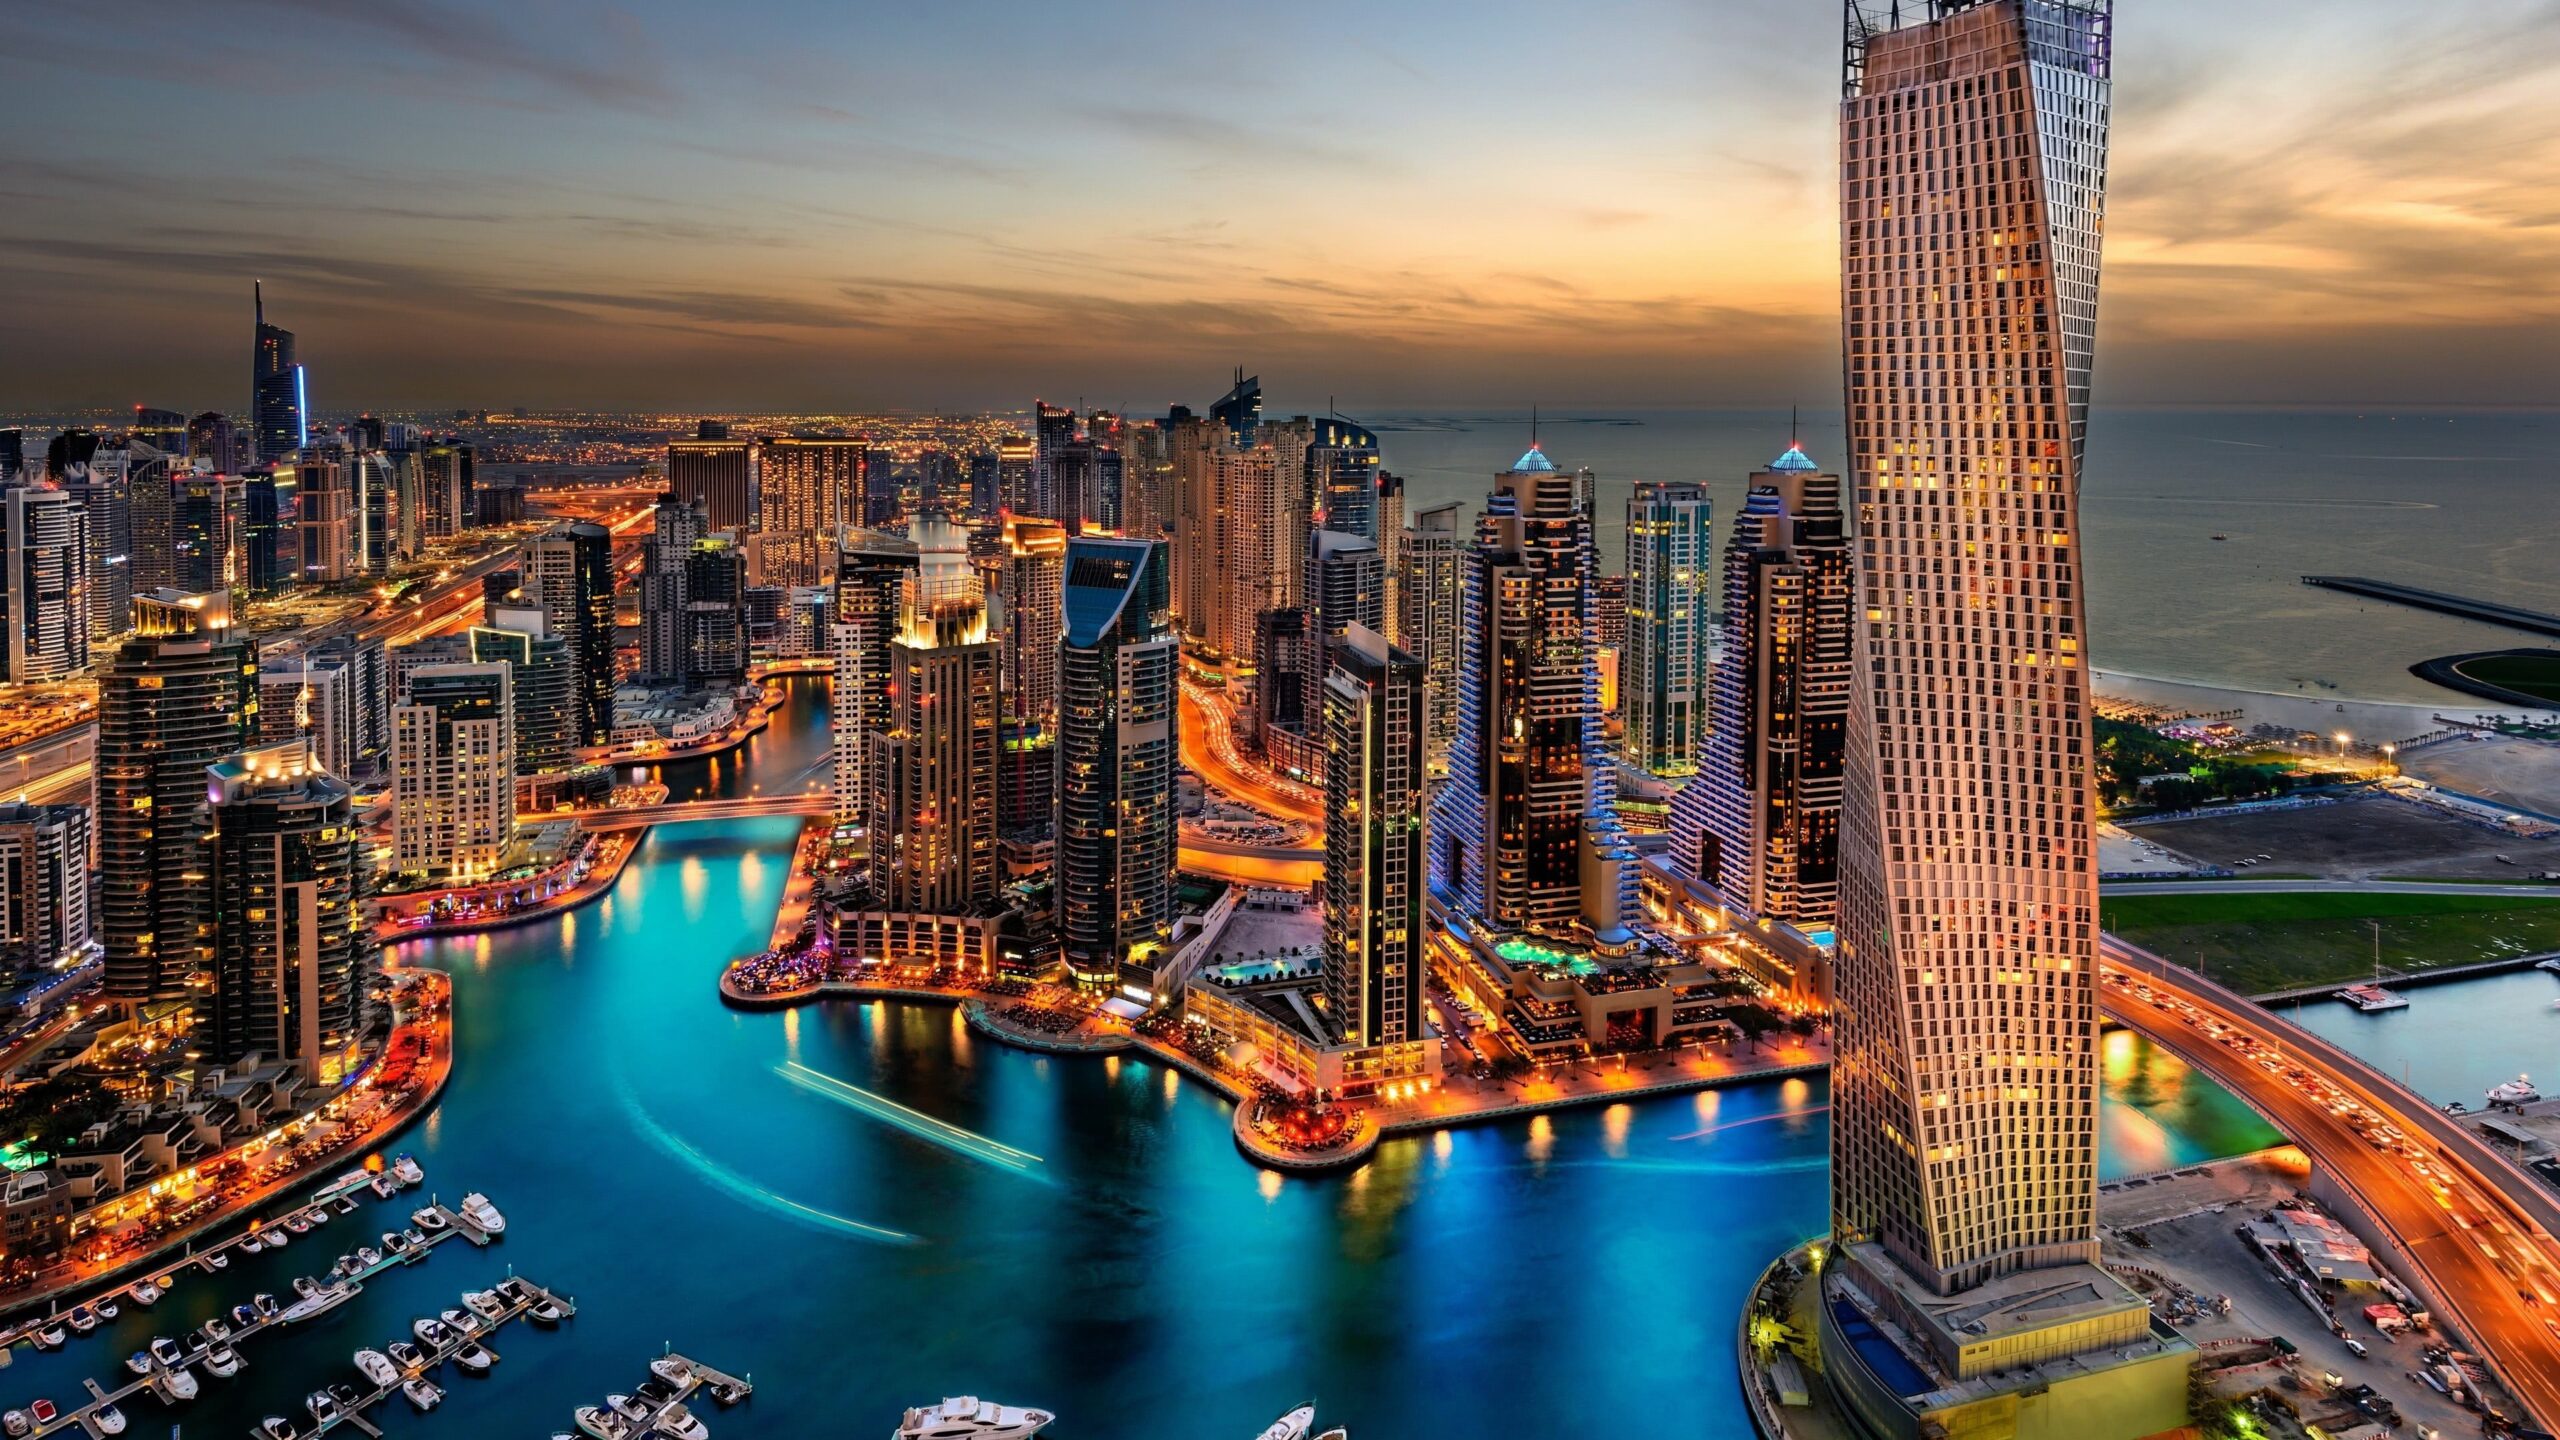 Who is the most beautiful place in Dubai?